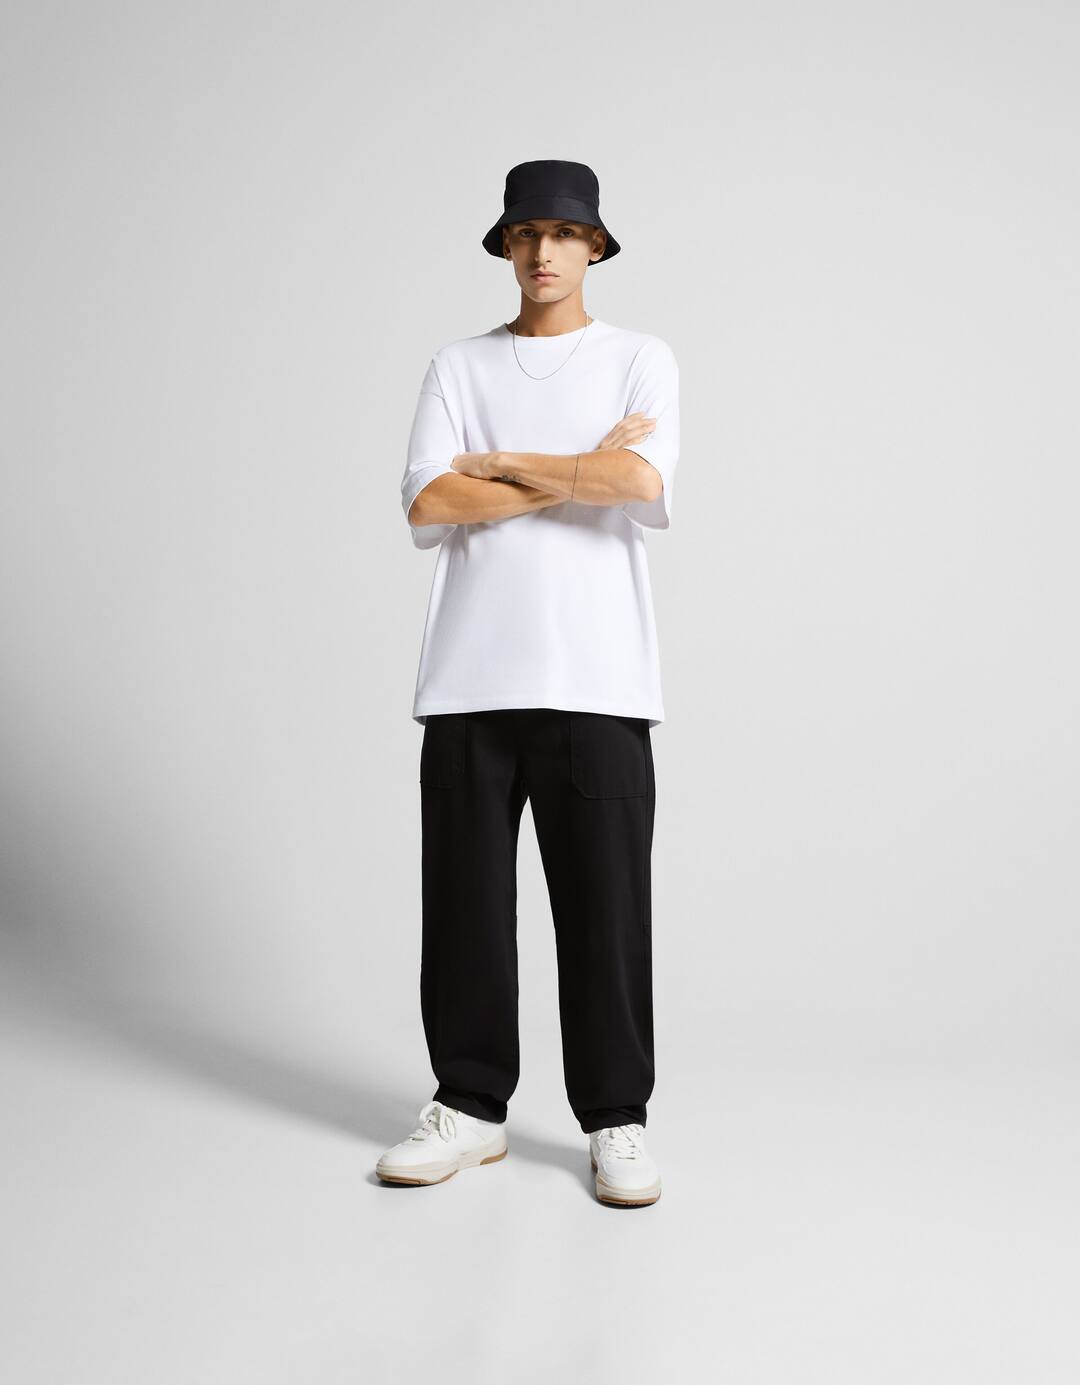 Cotton trousers with front pocket detail